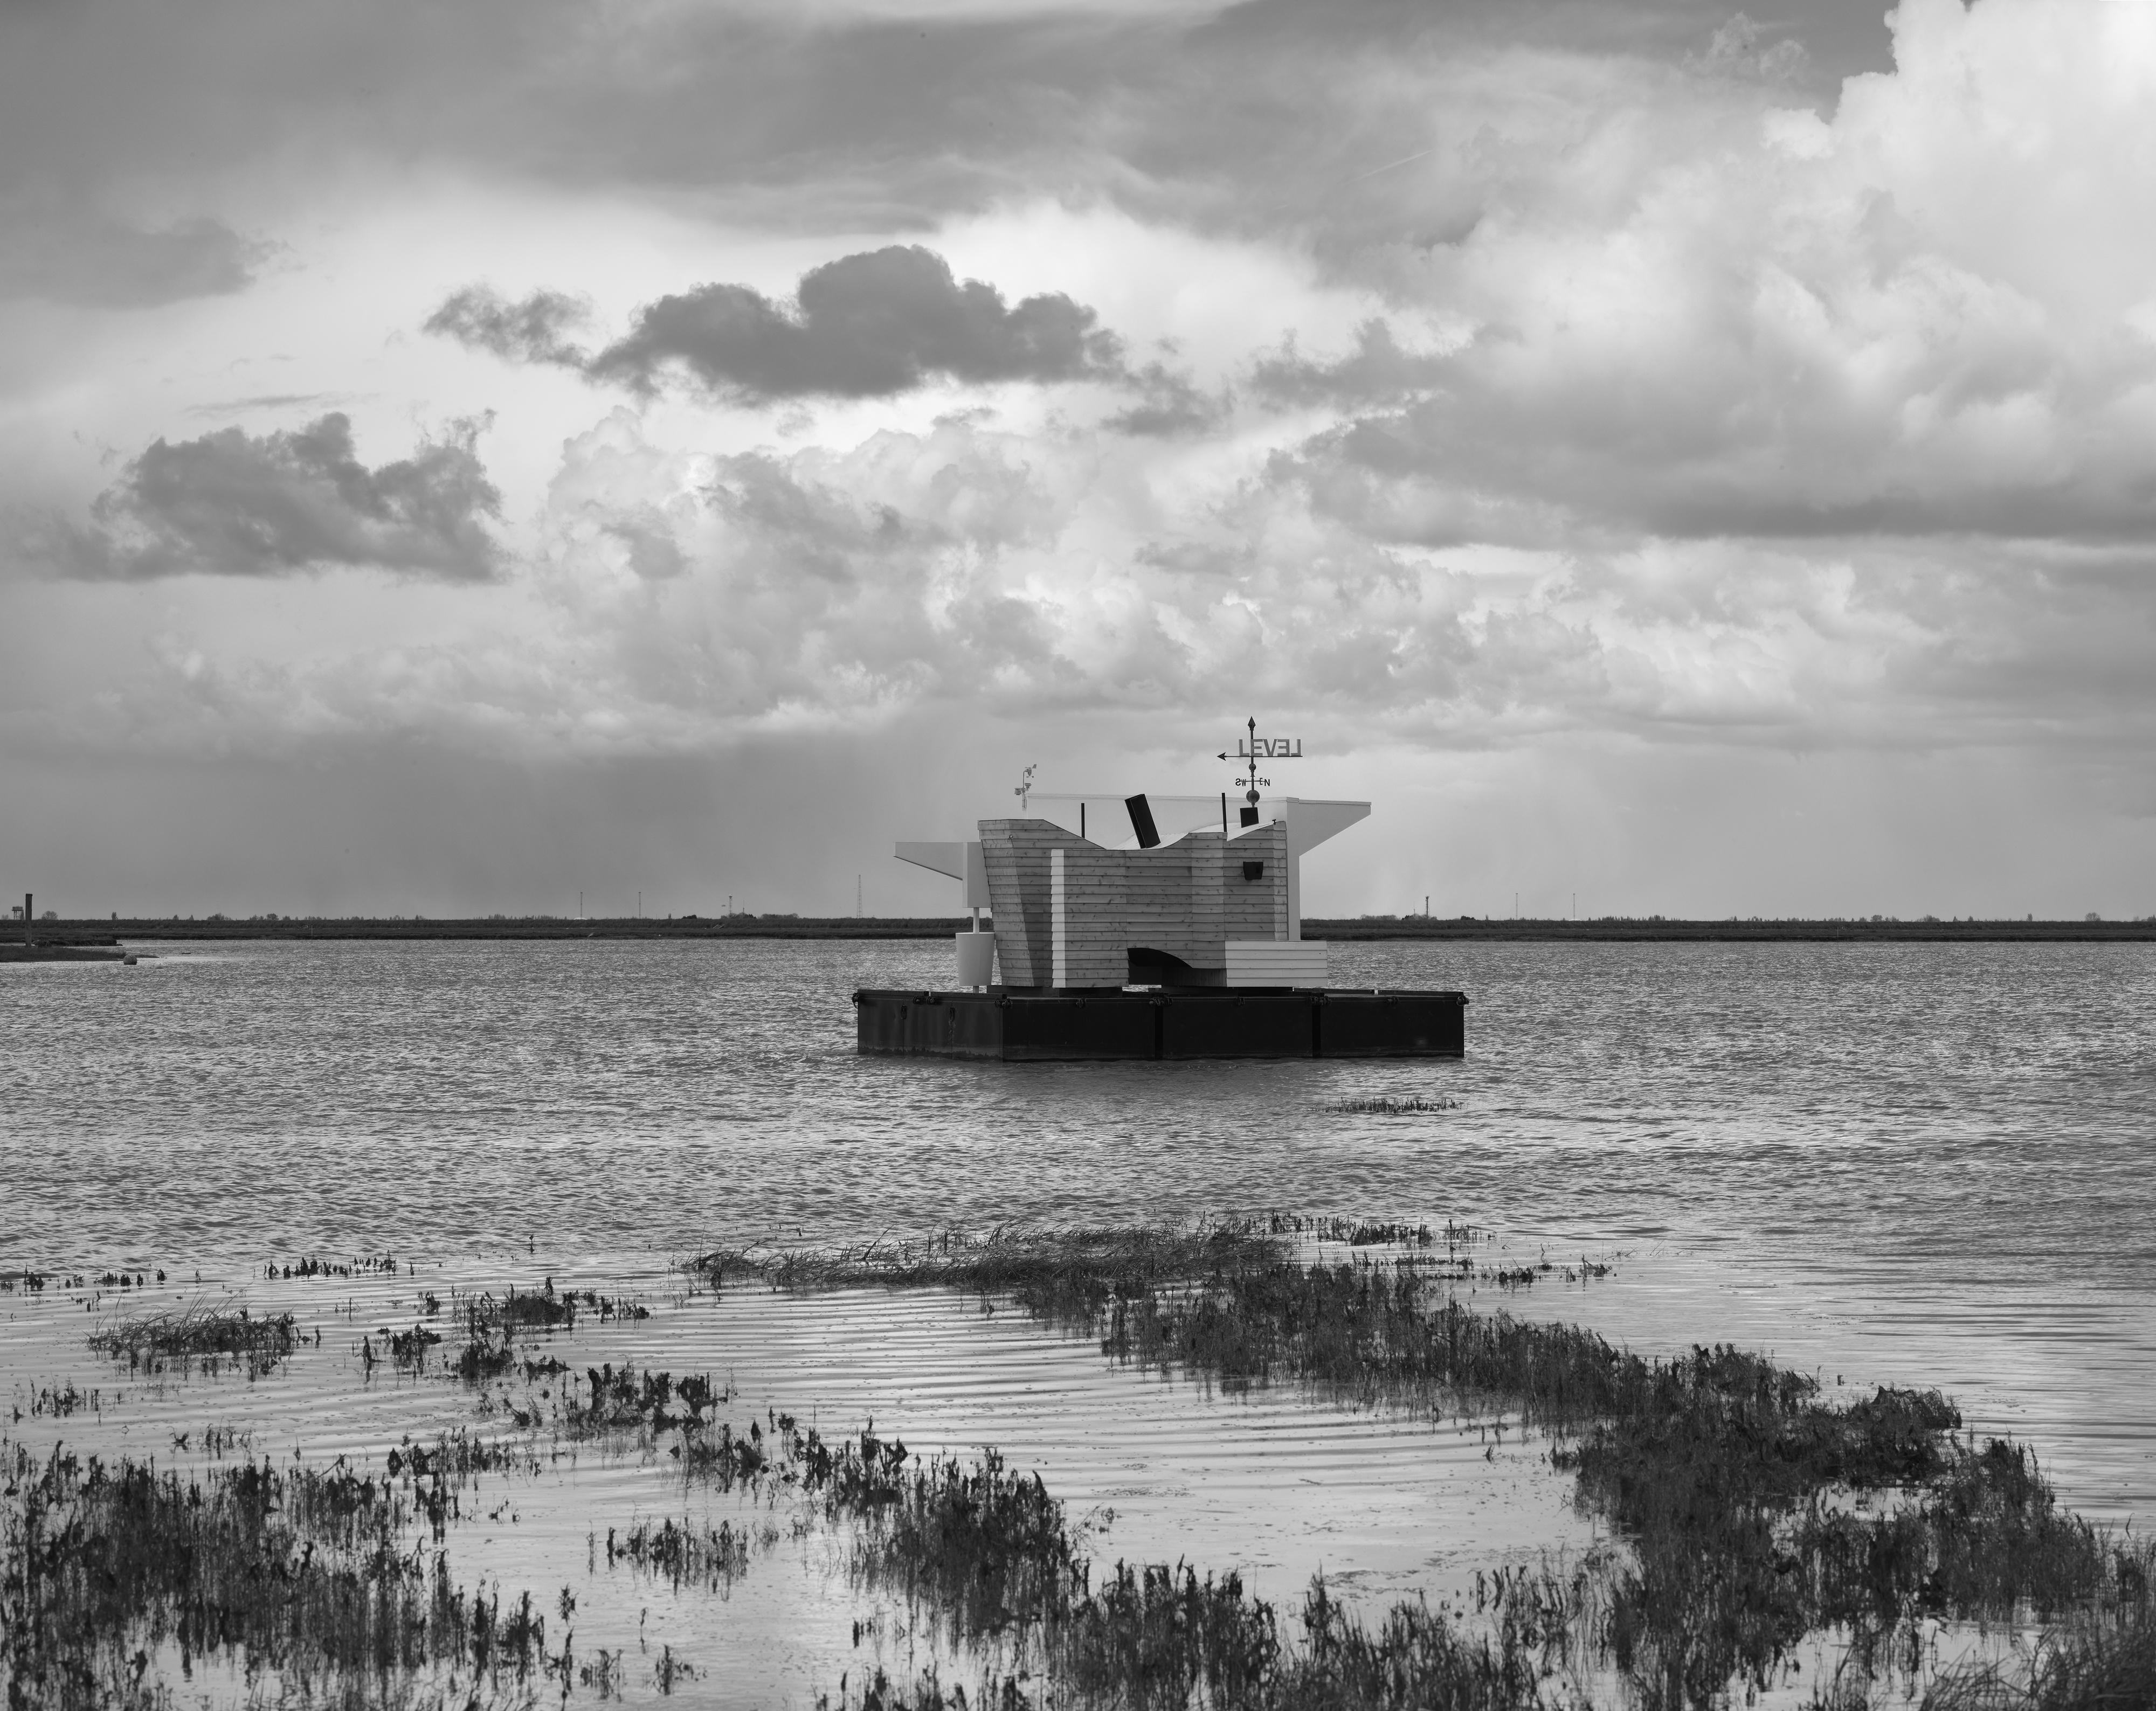 Black and white photo of Flood House on the Thames Estuary, cloudy skies